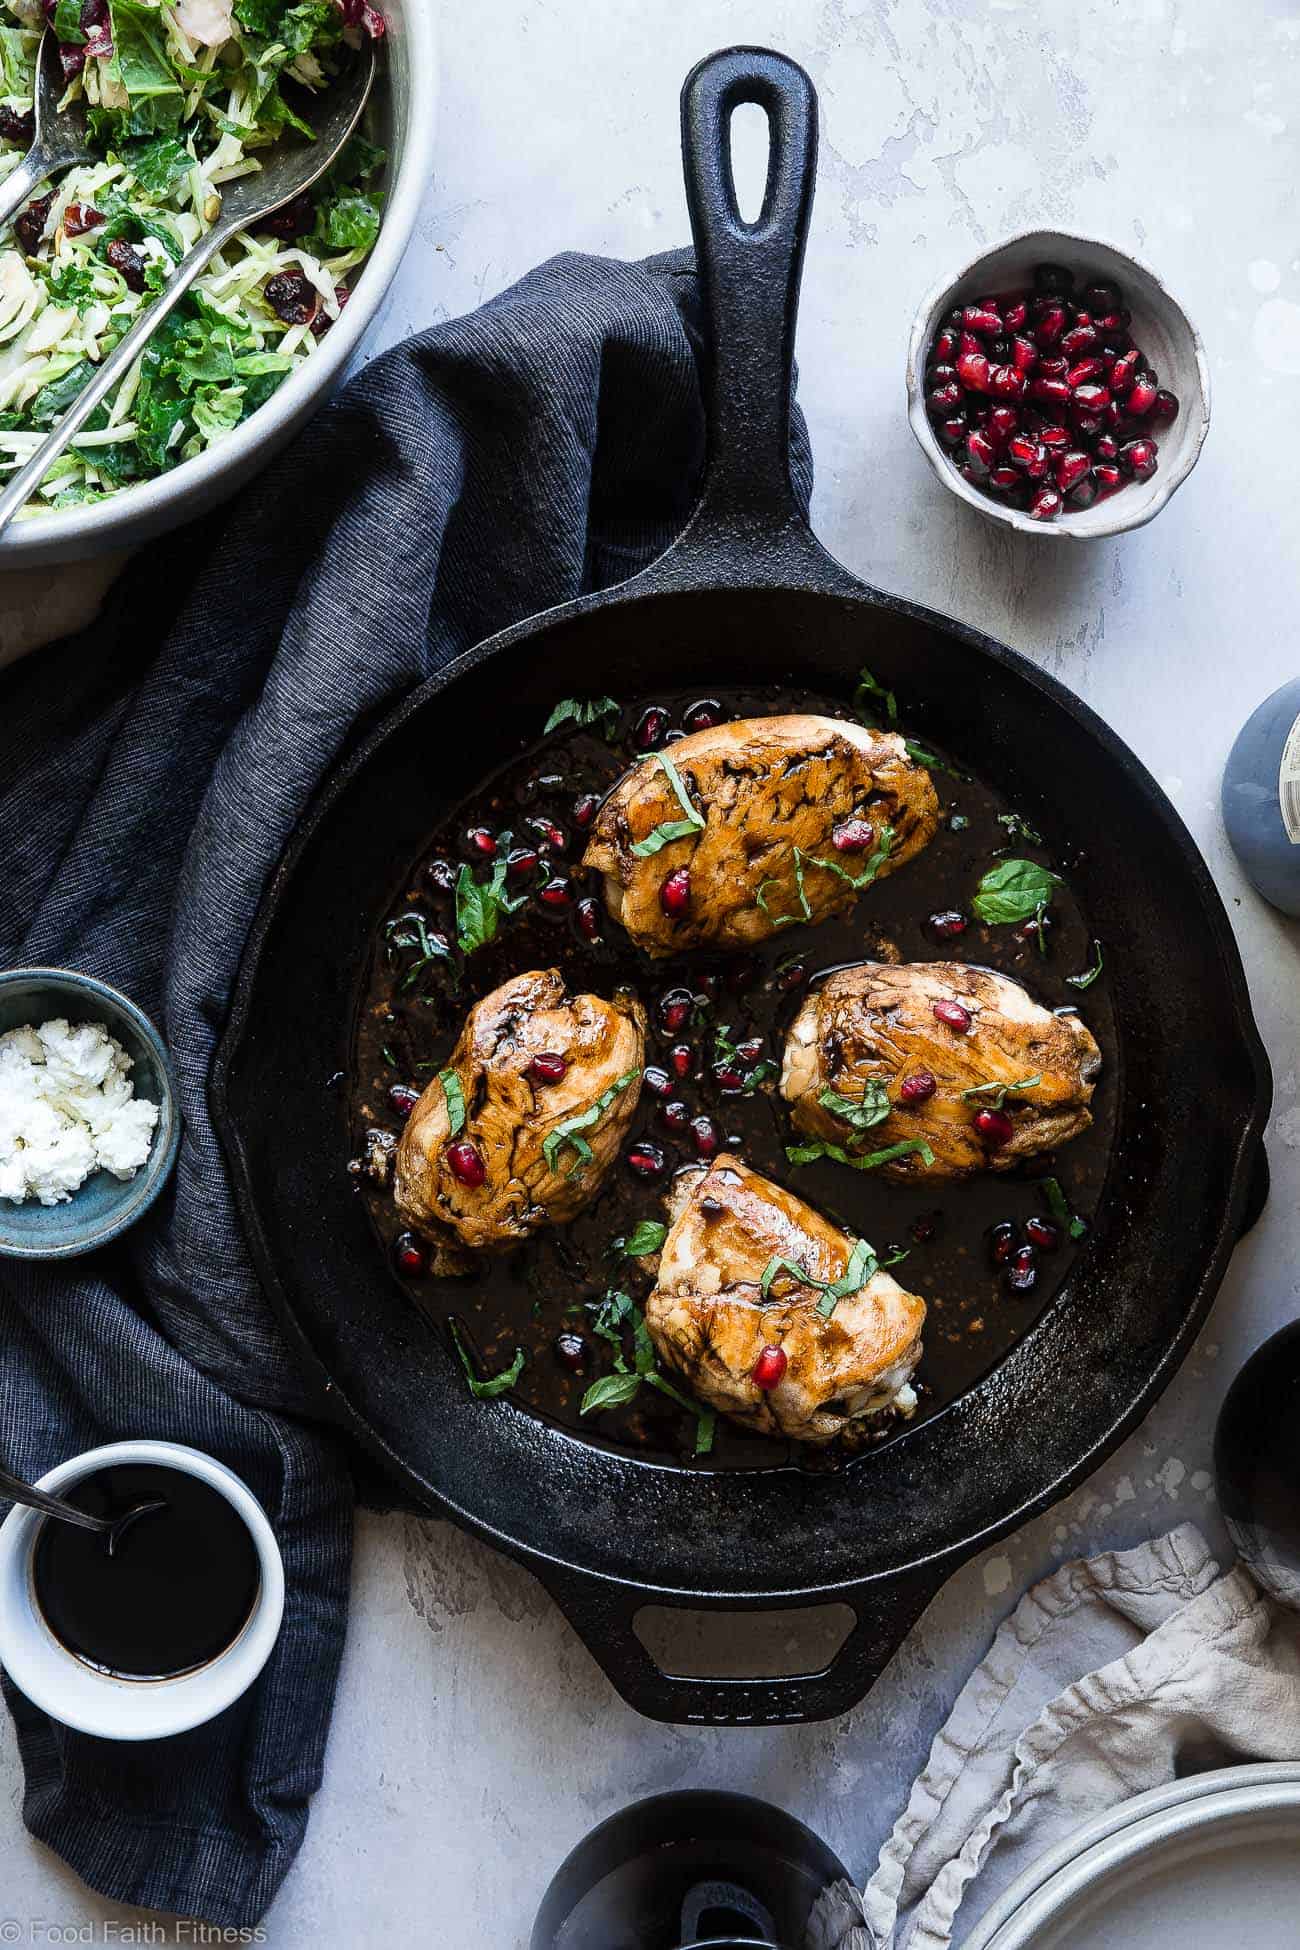 Baked Balsamic Goat Cheese Stuffed Pomegranate Chicken - This easy balsamic chicken recipe is a  healthy and gluten free dinner, loaded with superfoods! Both picky husbands and kids love this dinner and it feels like a fancy restaurant but is quick and easy enough for weeknights! | Foodfaithfitness.com | @FoodFaithFit